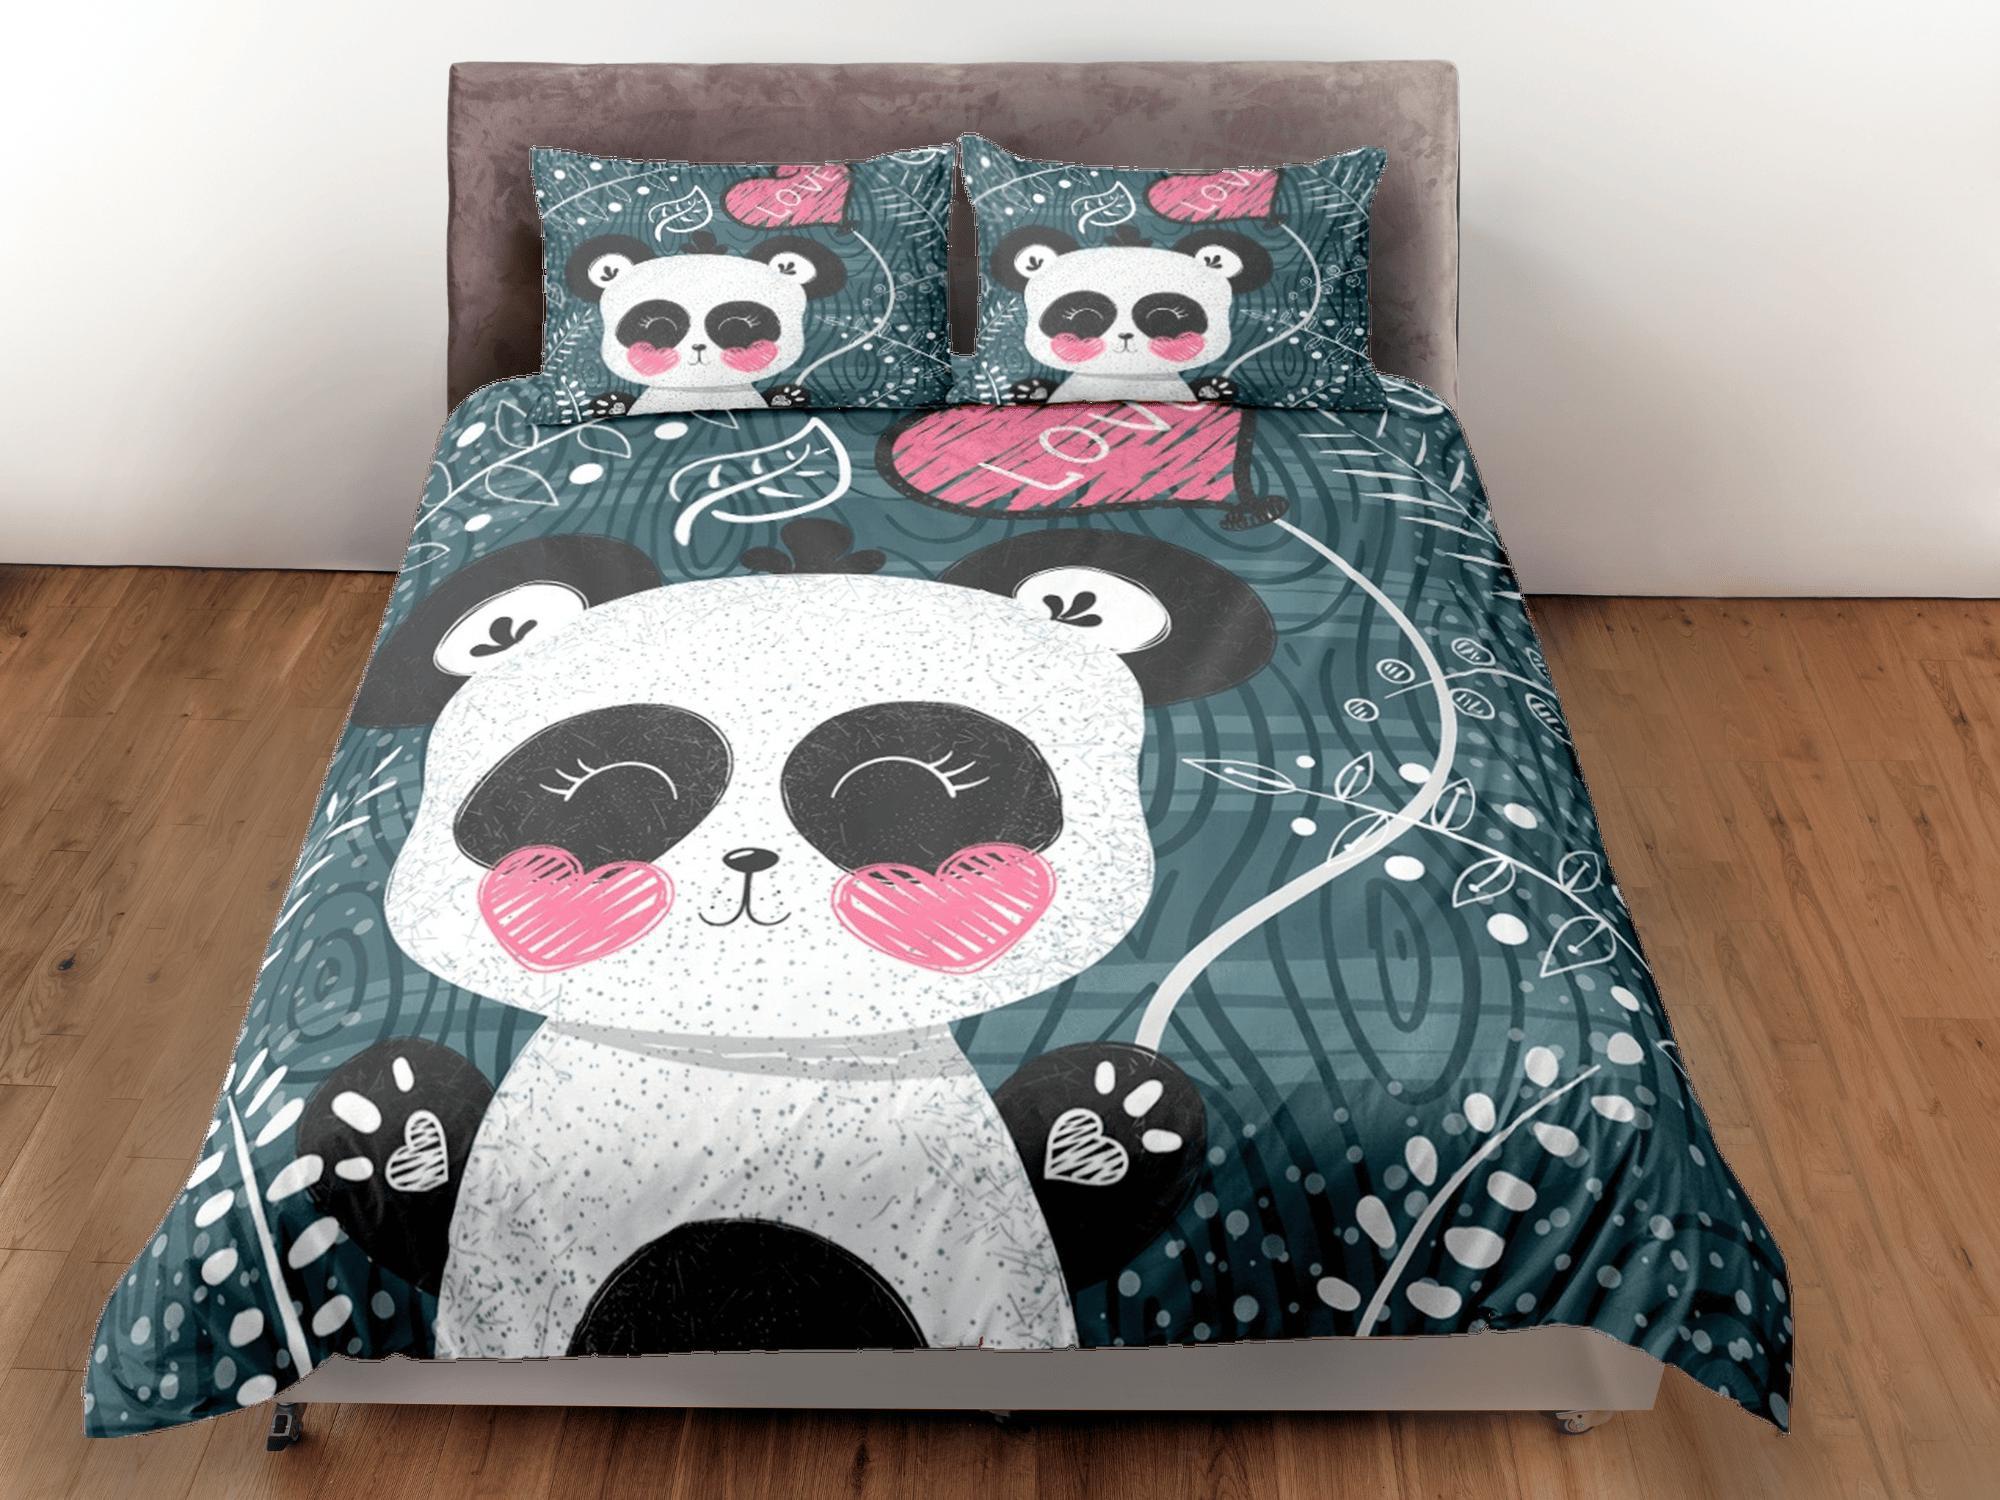 daintyduvet Cute Panda Green Duvet Cover Set Colorful Bedspread, Kids Bedding with Pillowcase